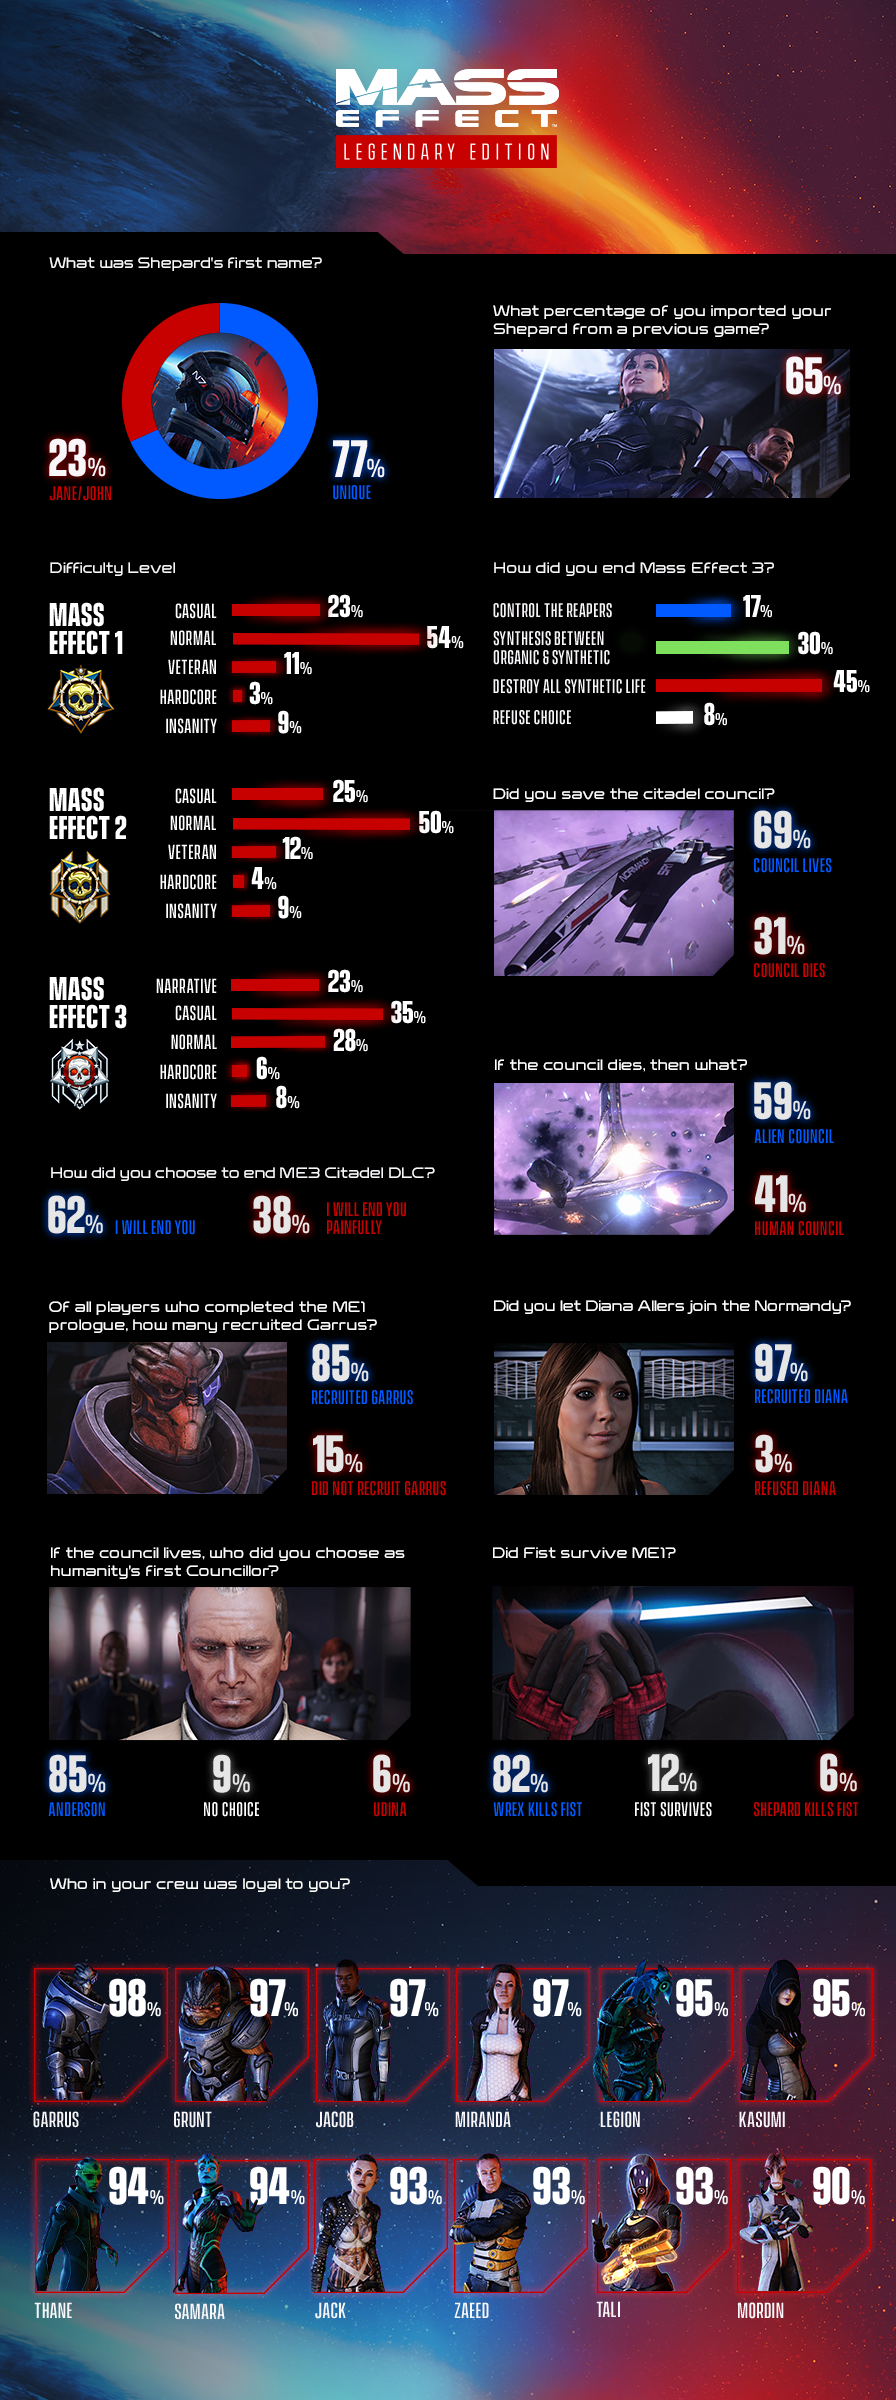 Mass Effect: Legendary Edition statistics 23% of fans chose Jane/John as Shepard's first name compared to 77% who chose a unique name. 65% of people imported their Shepard from a previous save. 54% of fans played Mass Effect 1 on Normal with 9% on Insanity, 50% of players played Mass Effect 2 on normal with 9% on insanity and 28% of players played Mass Effect 3 on normal with 8% of players choosing insanity. 45% chose destroy ending, 69% saved the council and 31% let them die, if they died 59% put in an alien council and 41% put in a human council. 85% recruited Garrus in Mass Effect 1, 97% of players recruited Diana Allers. 85% chose Anderson as humanity's first councillors with 6% choose Udina and 9% no choice. 82% lets Wrex kill Fist 12% let him survive and 6% of Shepard's kill Fist. Garrus is loyal to 98% of Shepards whereas Mordin was 90%, Grunt, Jacob and Miranda at 97%, Legion and Kasumi at 95%, Thane and Samara at 94% and Jack, Zaeed and Tali at 93%